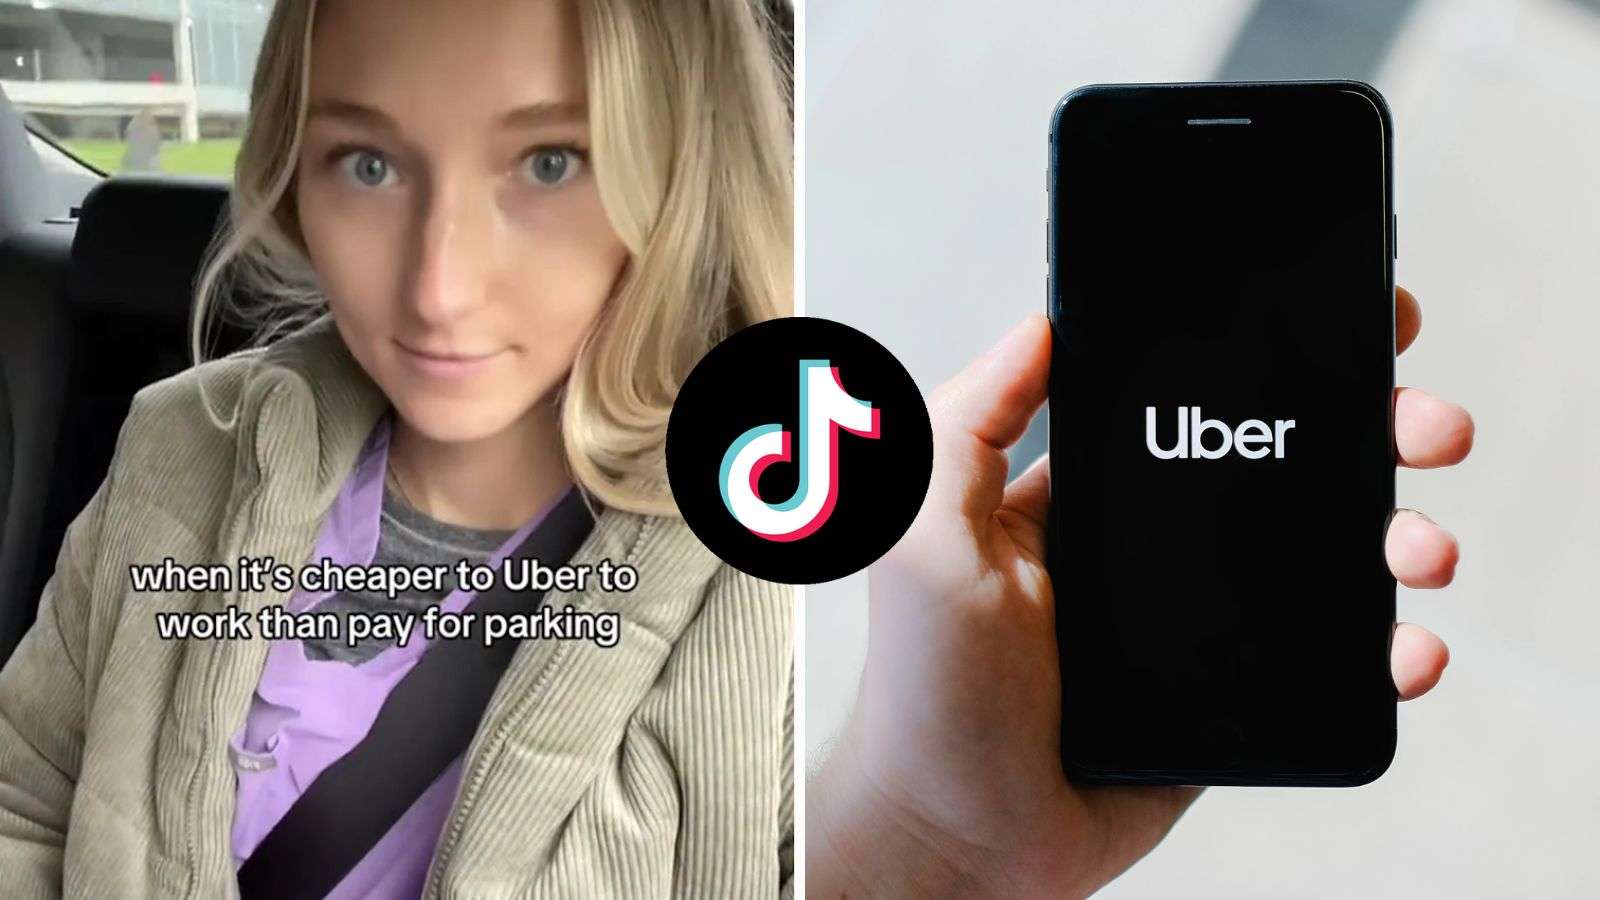 Nurse goes viral Ubering to work because it's cheaper than parking